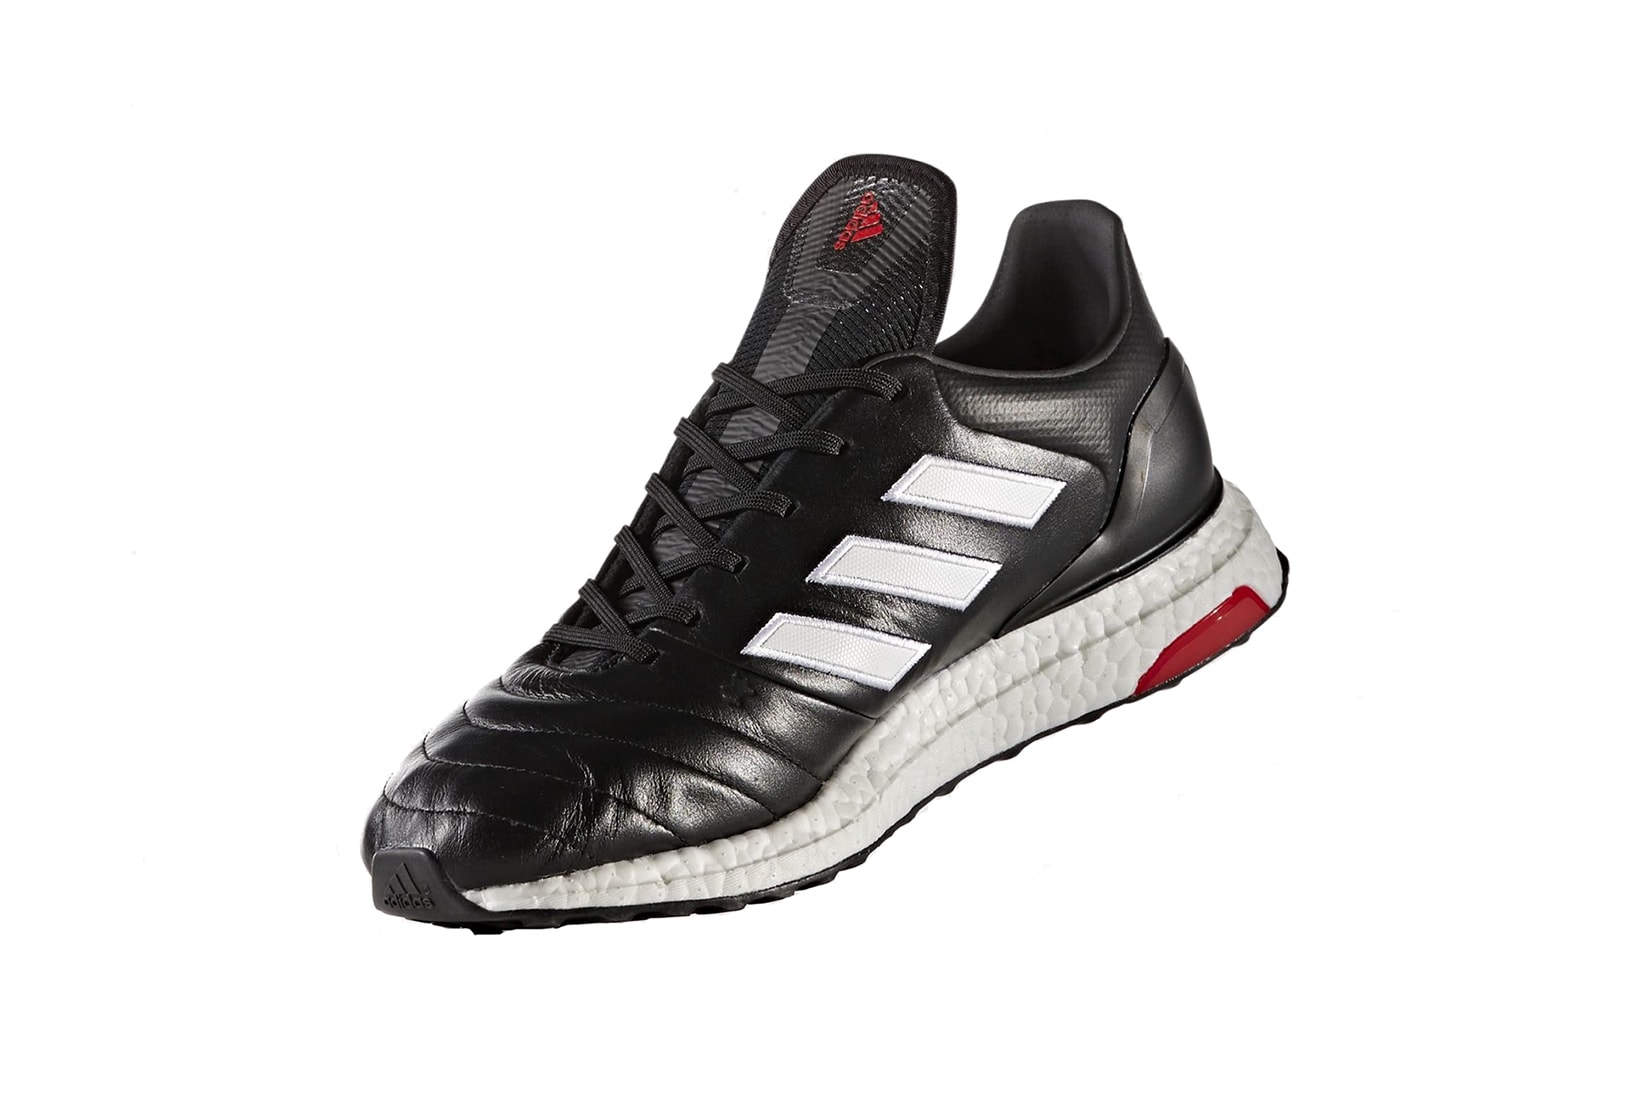 adidas Copa 17.1 Ultraboost Copa Mundial Inspired Soccer Boot